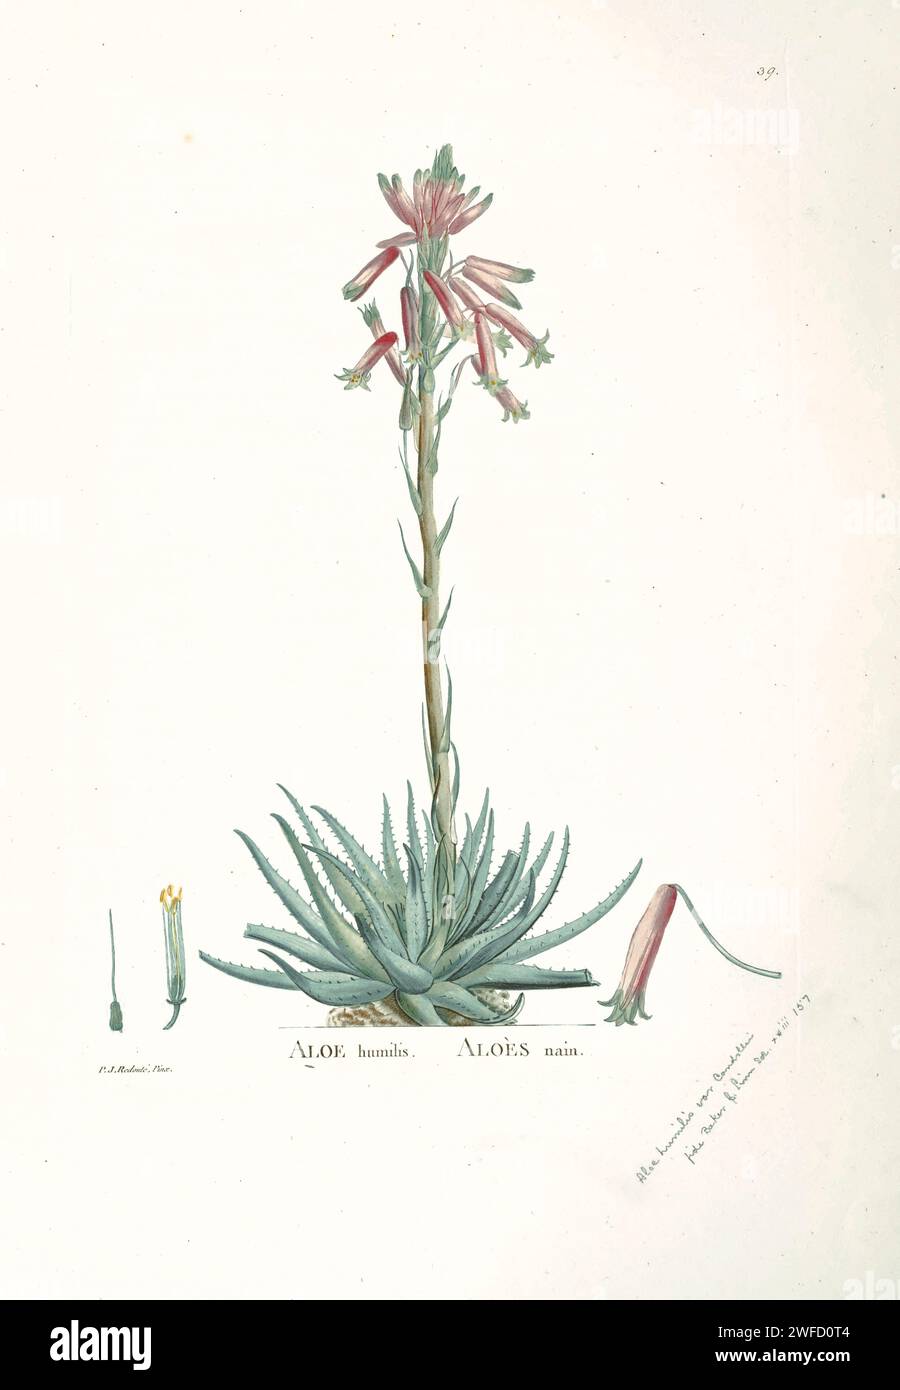 Aloe humilis from History of Succulent Plants [Plantarum historia succulentarum / Histoire des plantes grasses] painted by Pierre-Joseph Redouté and described by Augustin Pyramus de Candolle Aloe humilis, also known as spider aloe is a species of succulent plant in the genus Aloe. It is endemic to South Africa's Cape Province, and is a low growing, short stemmed aloe with small spines and which grows in dense clusters Stock Photo